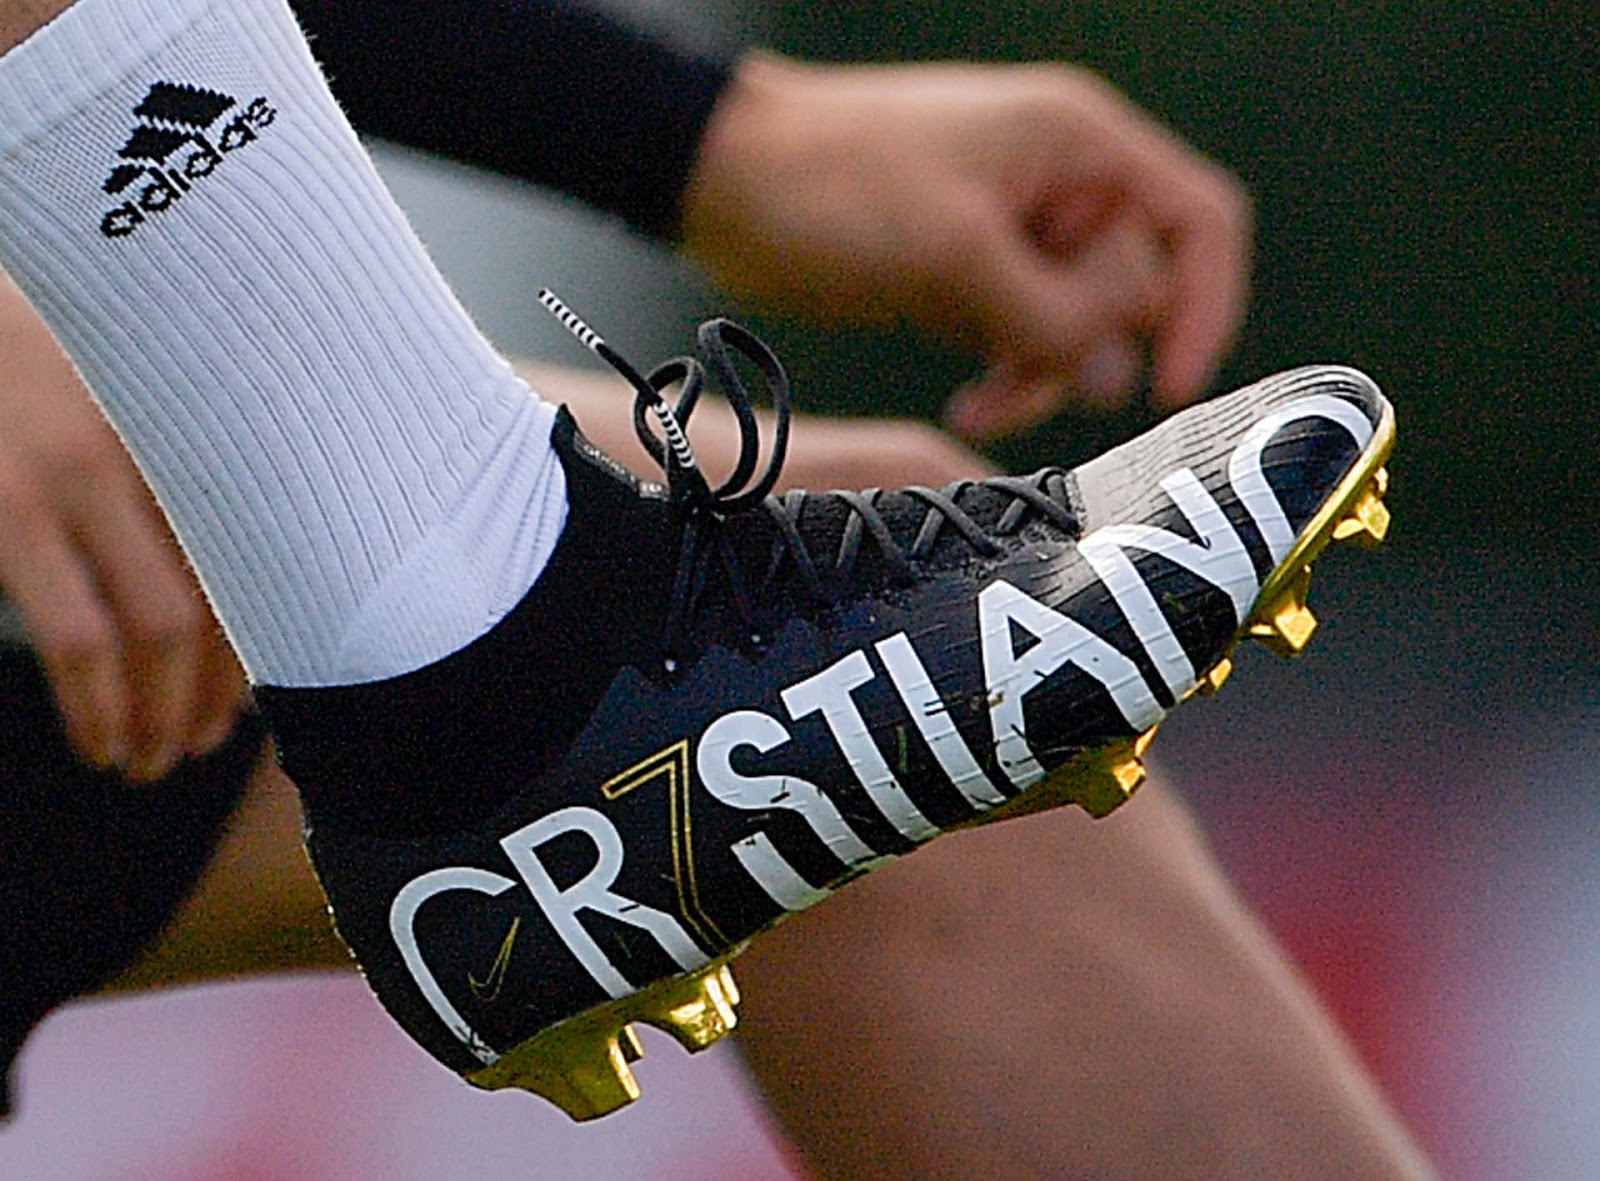 engine scramble pasta Cristiano Ronaldo Shows Off All-New Nike Mercurial Superfly Signature Boots  - Footy Headlines